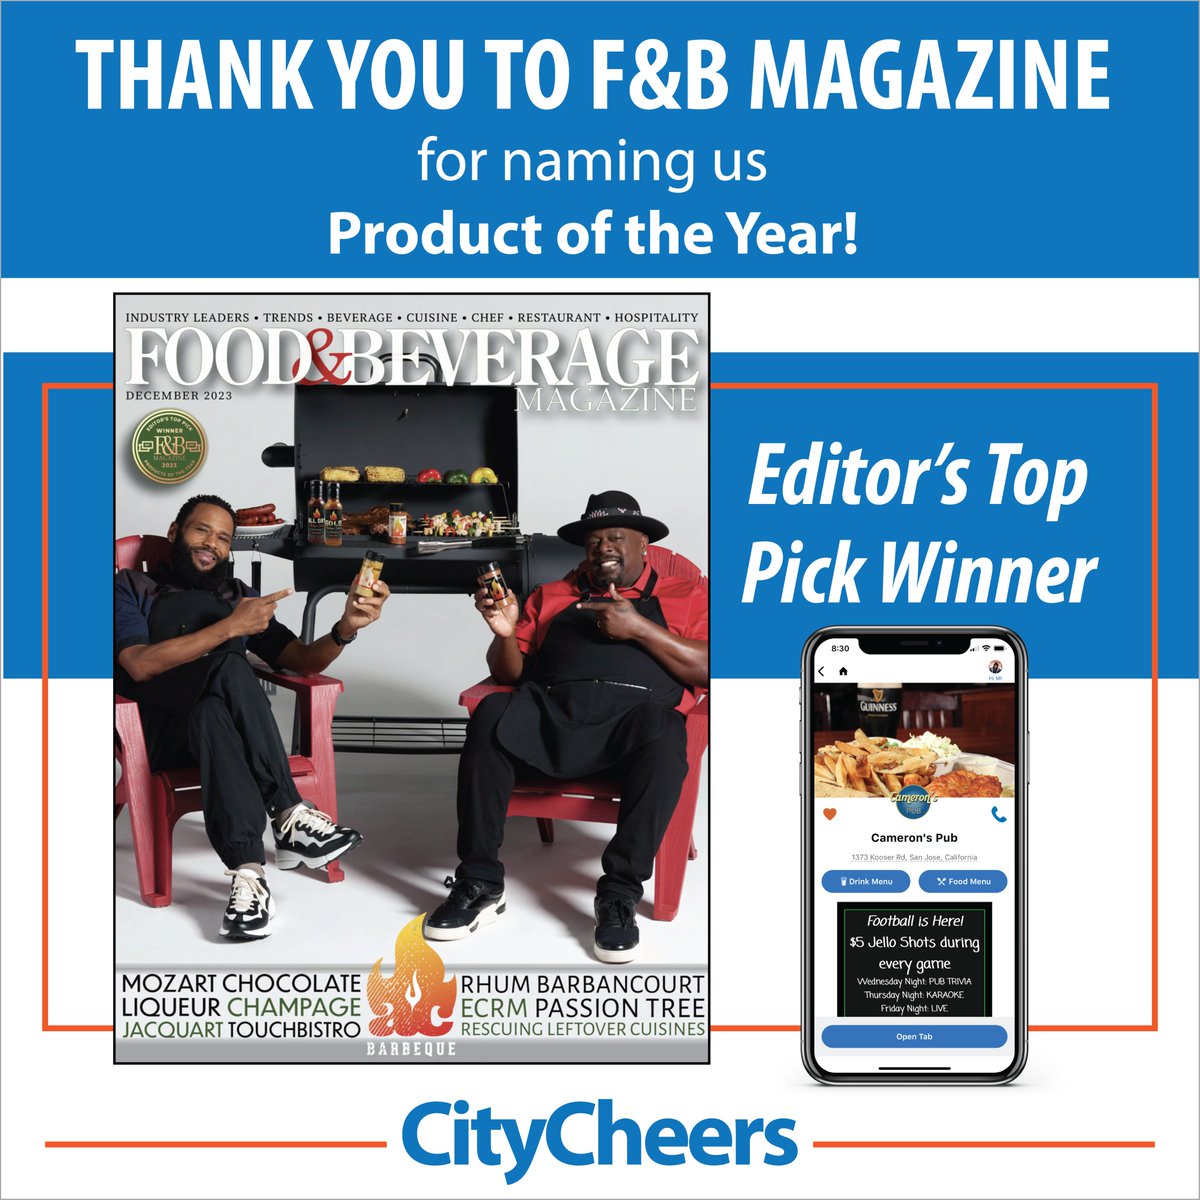 Thank you to Food & Beverage Magazine for naming CityCheers Product of the Year!

Take a look at the magazine article here:
issuu.com/foodandbeverag…

#customerservice #food #restaurant #tech #editorspicks